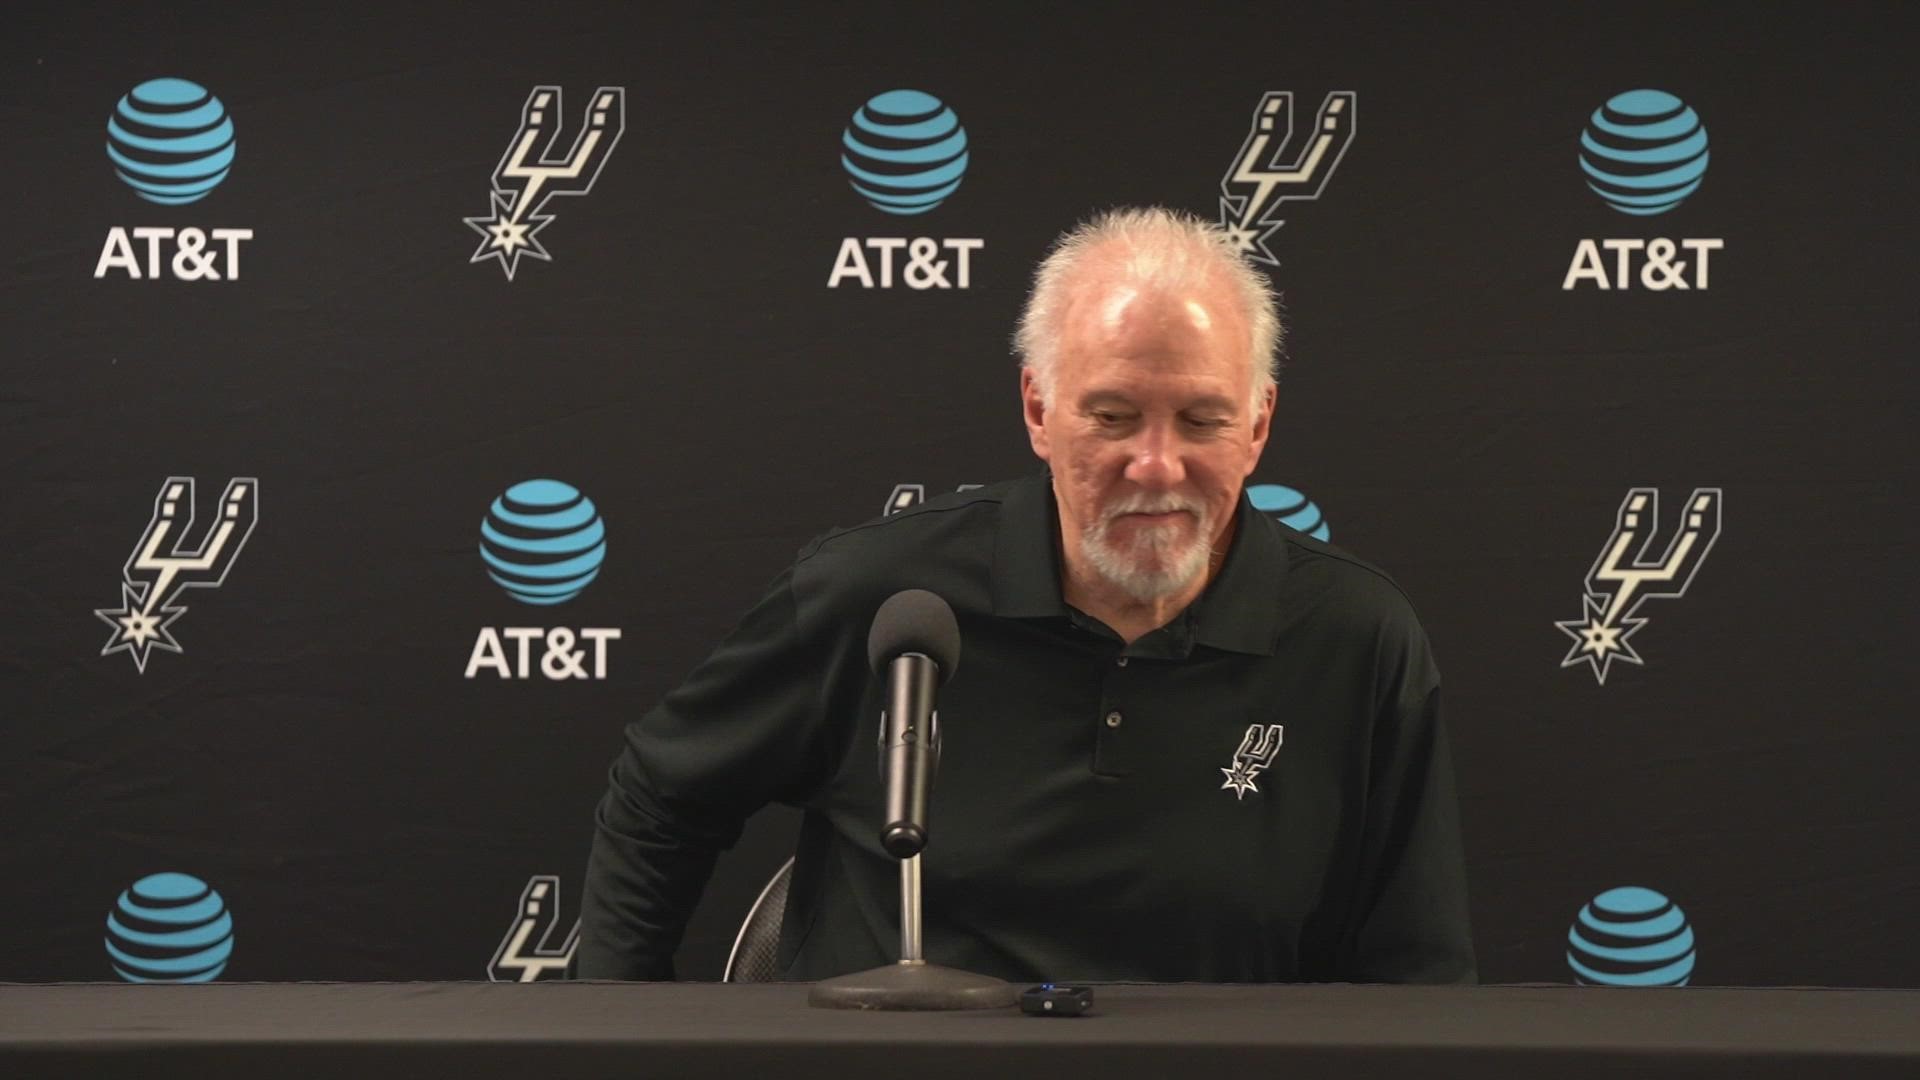 "I think it was expected, deserved," Popovich said. "We knew we had a wild, competitive young man who was in love with basketball, quite athletic and just fierce."